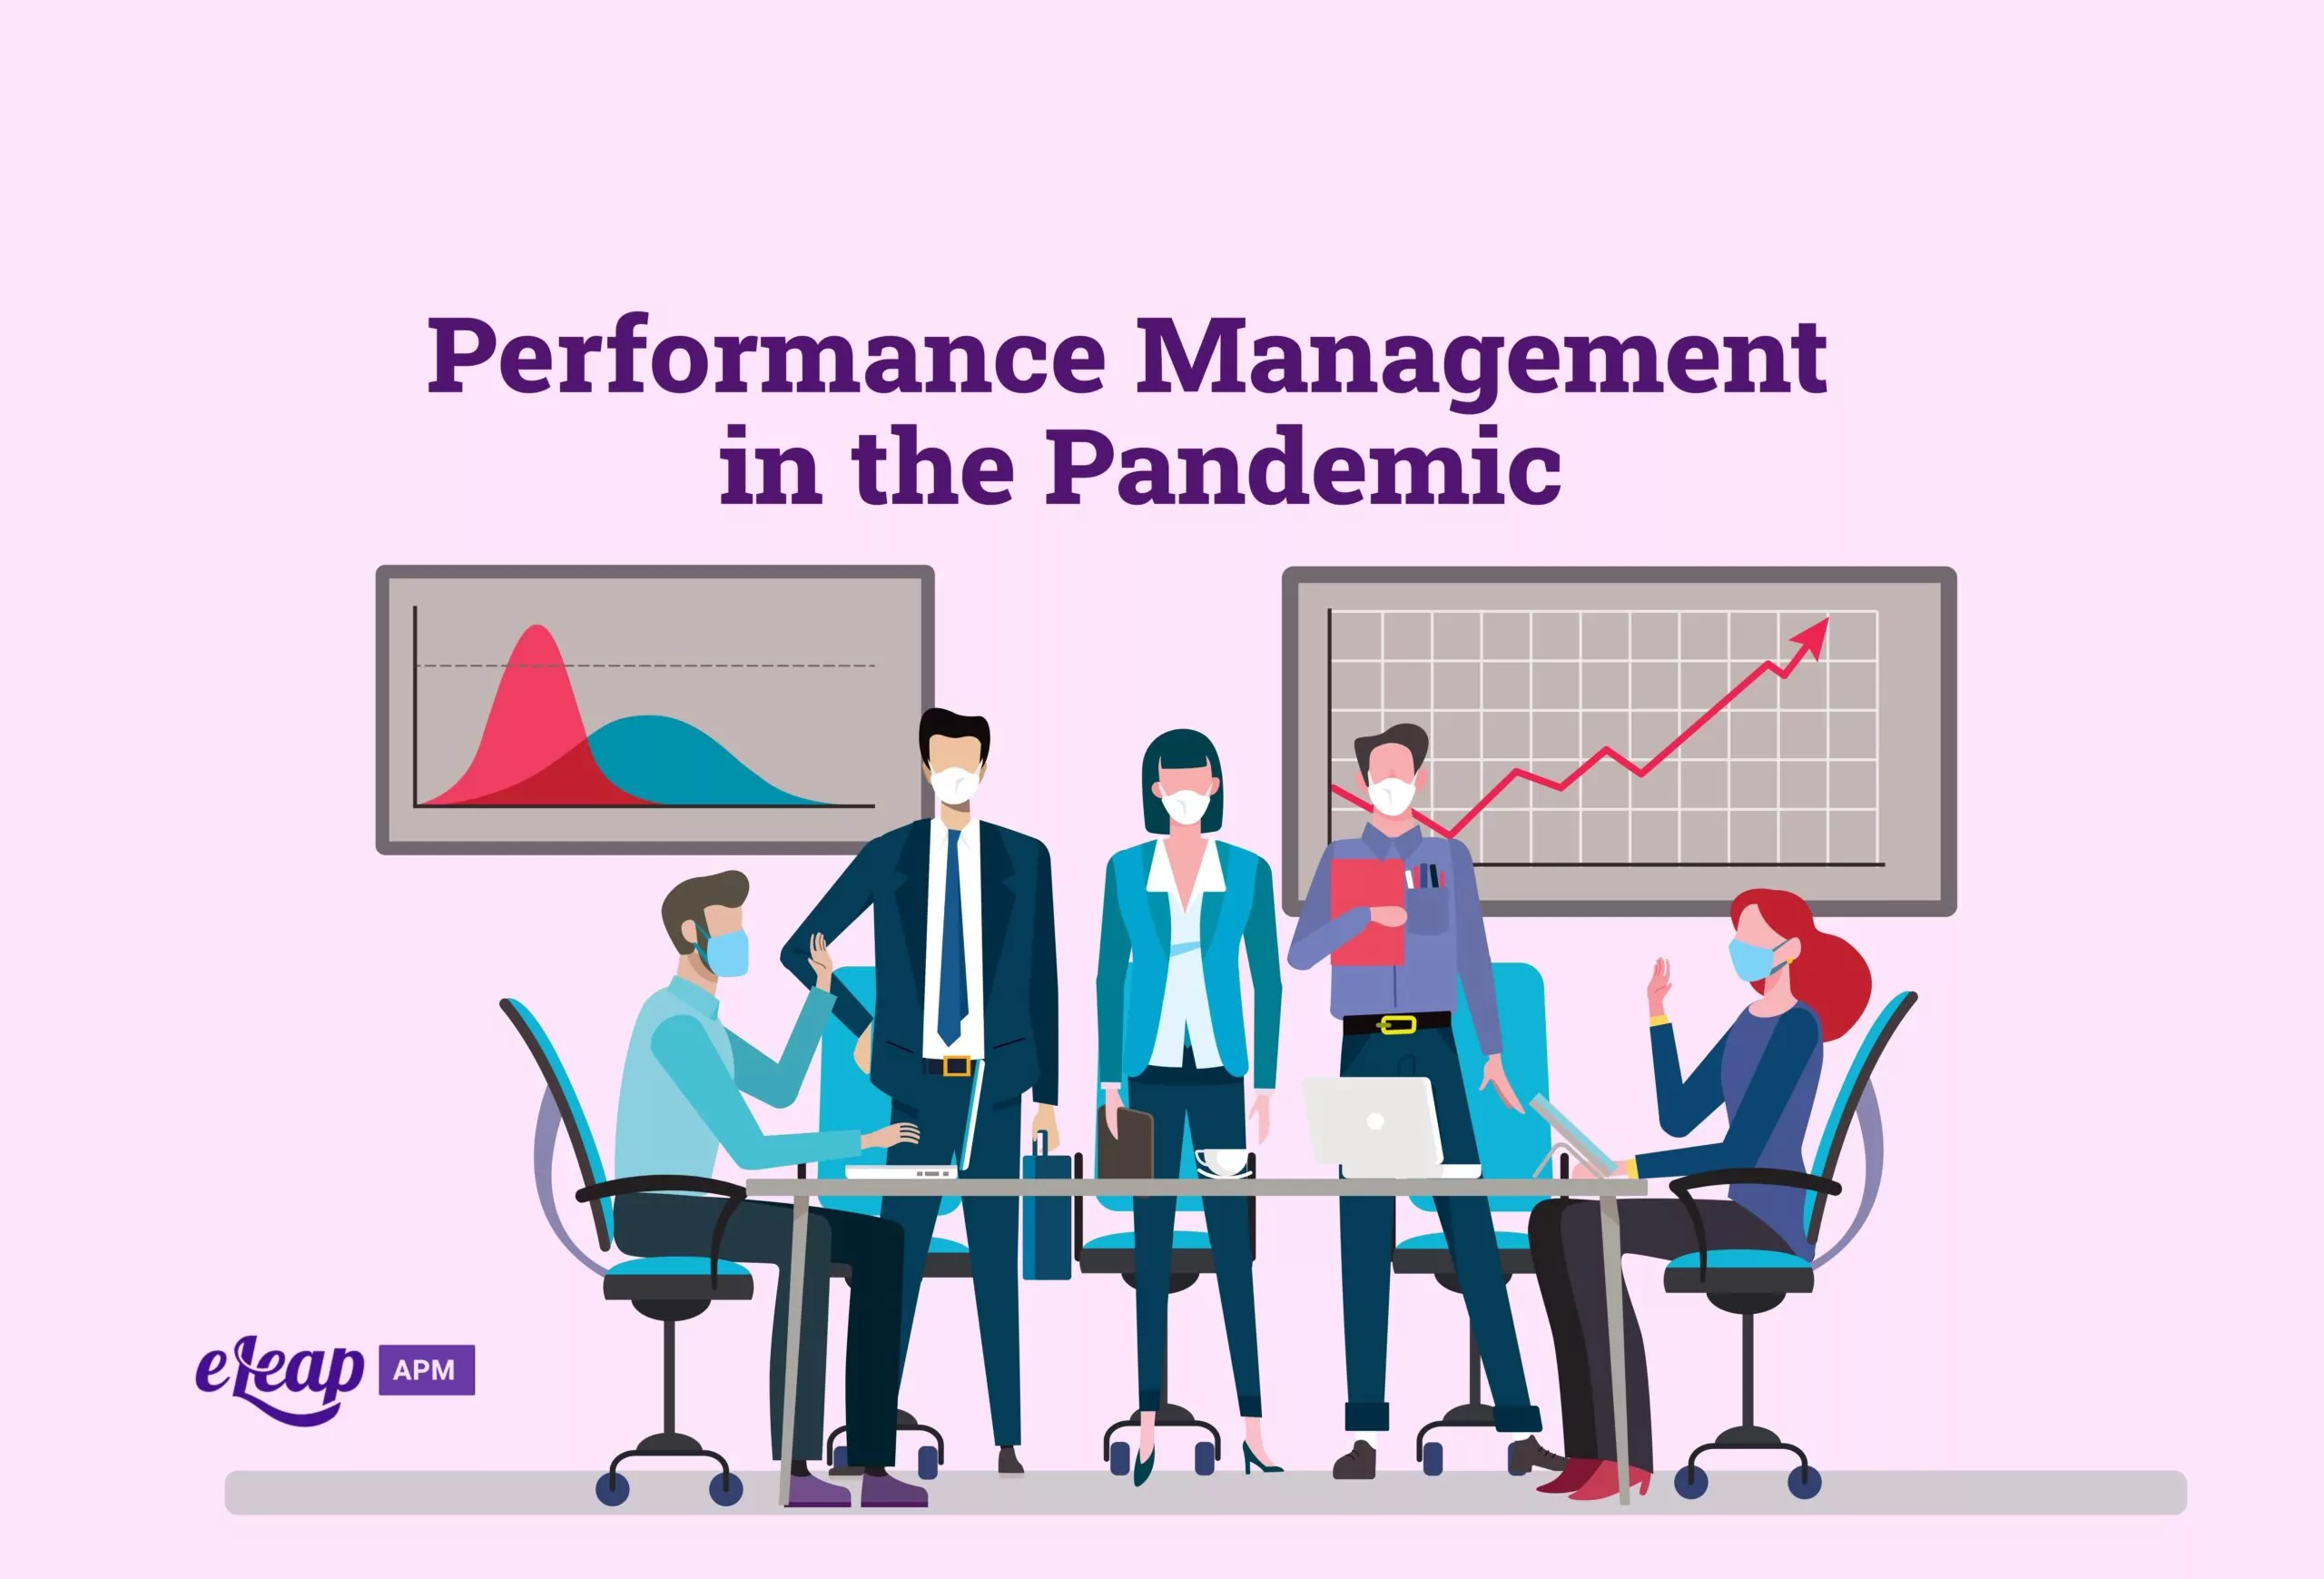 Performance Management in the Pandemic